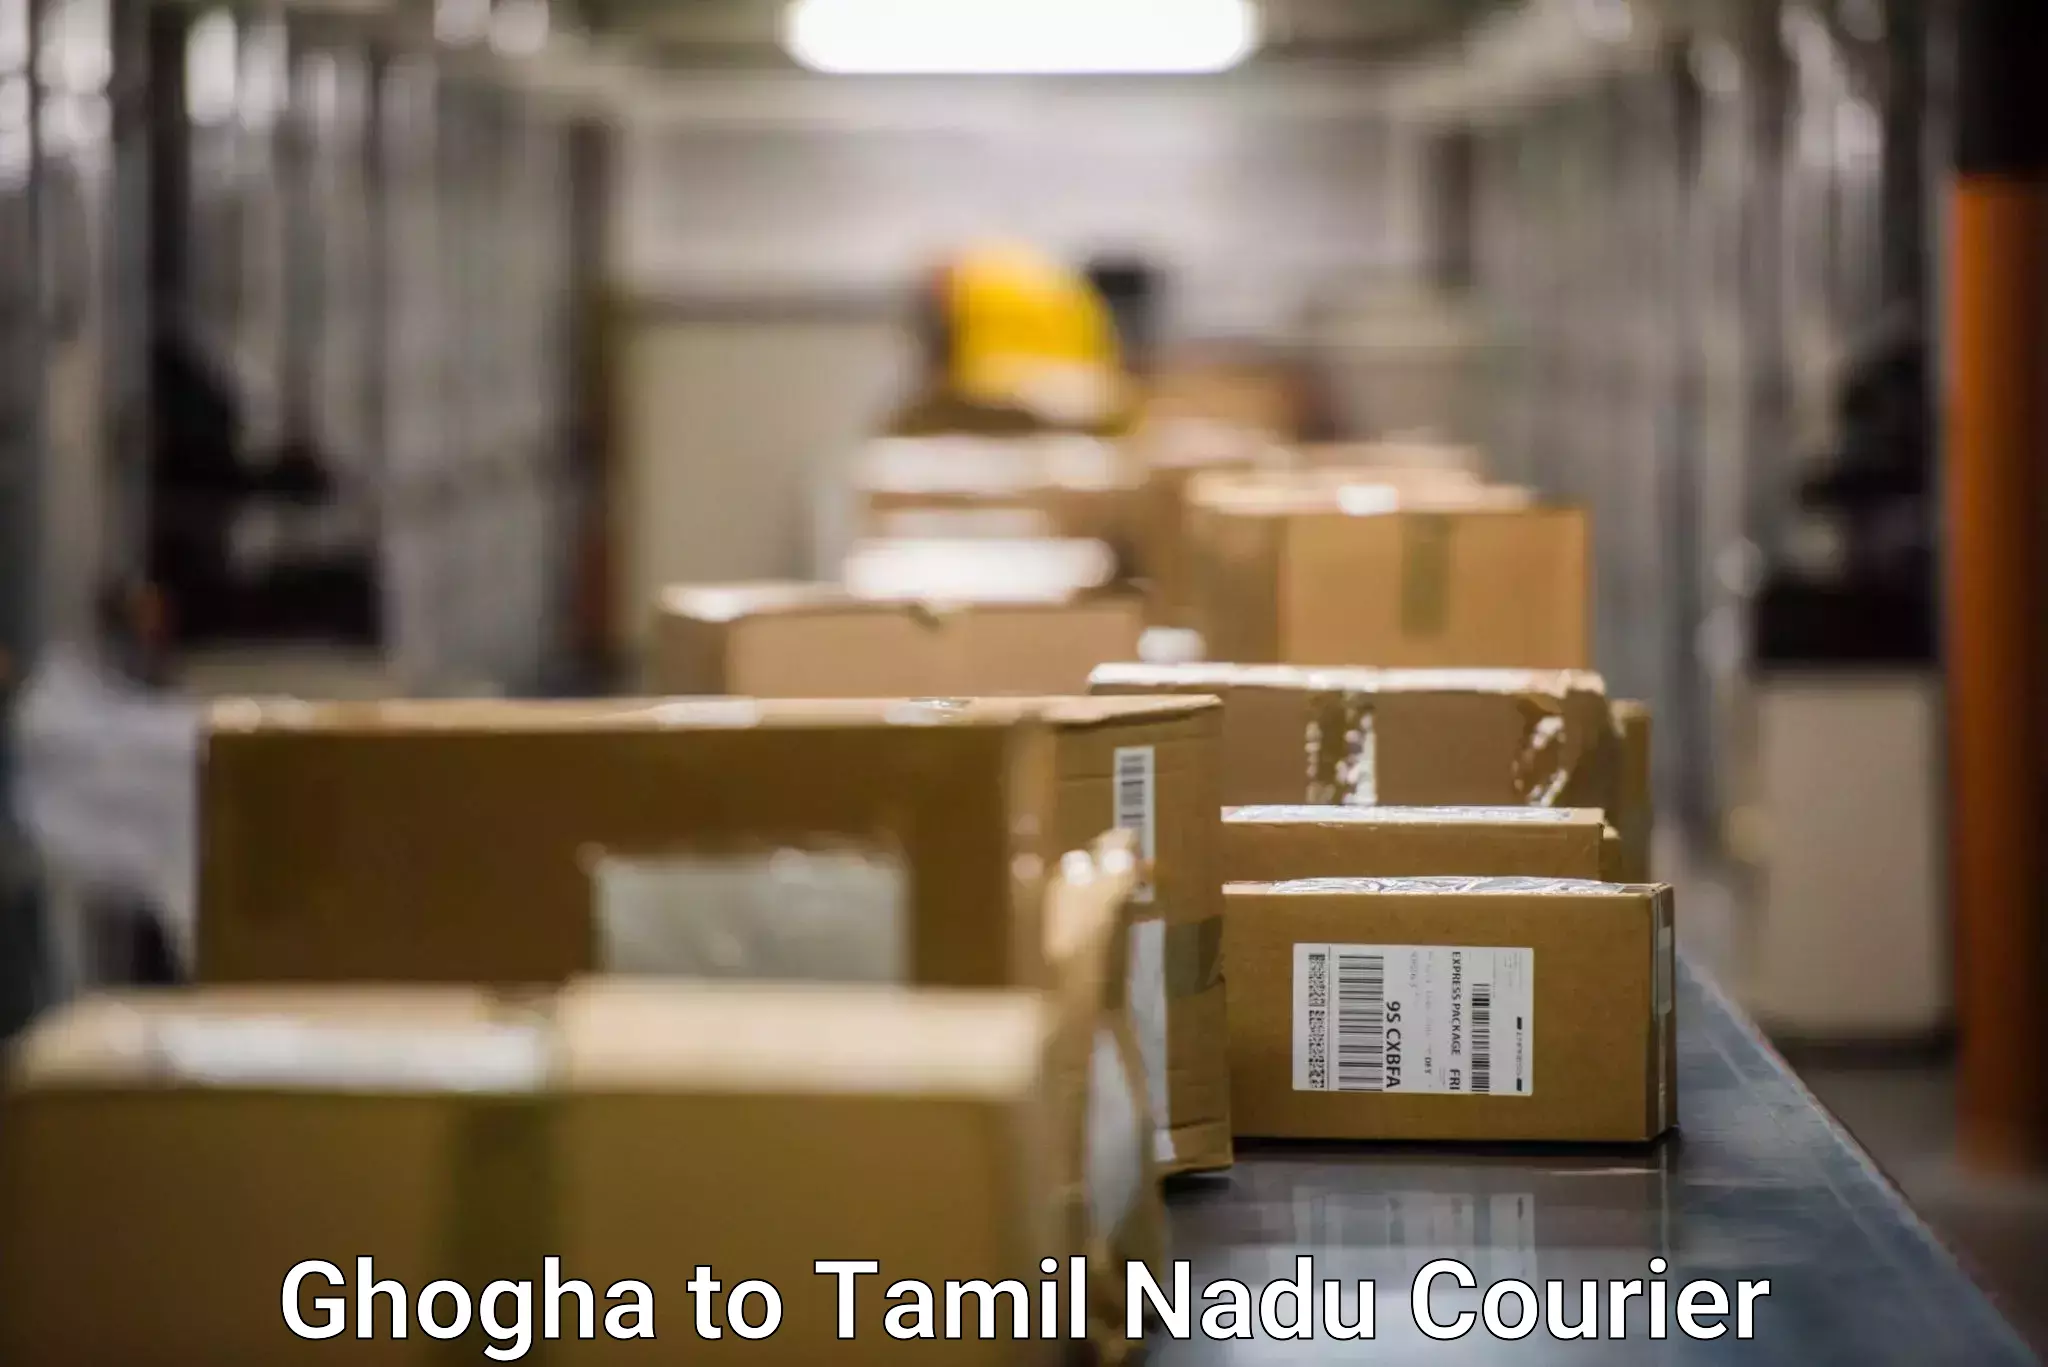 24-hour courier services Ghogha to Ennore Port Chennai